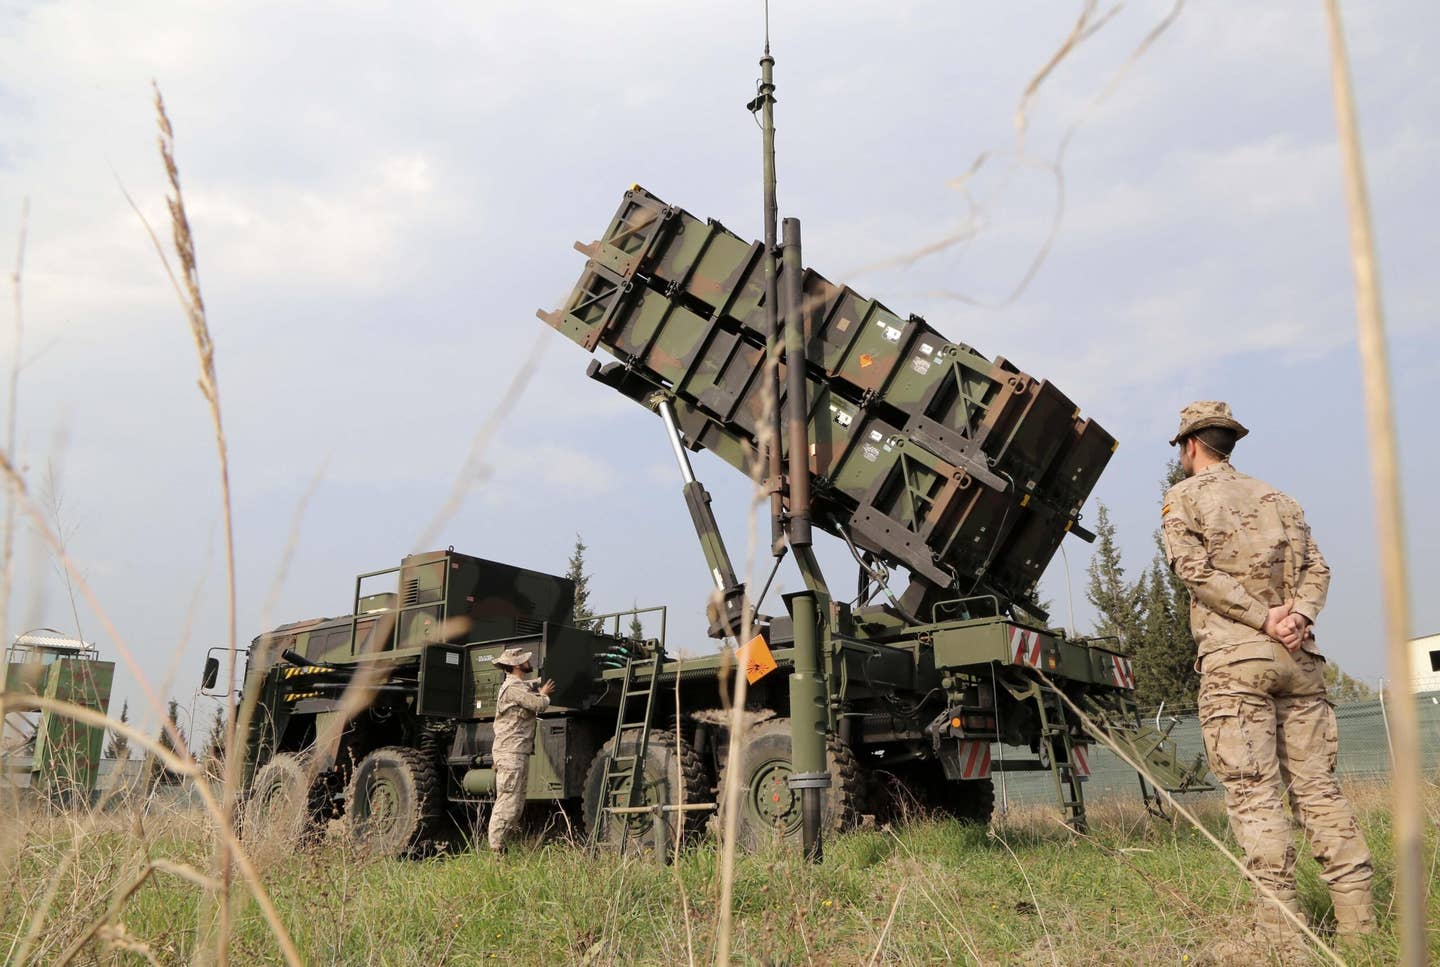 A Spanish Patriot air defense system during a deployment to Adana, Turkey, on behalf of NATO, on January 26, 2015. <em>Photo by Ibrahim Erikan/Anadolu Agency/Getty Images</em>